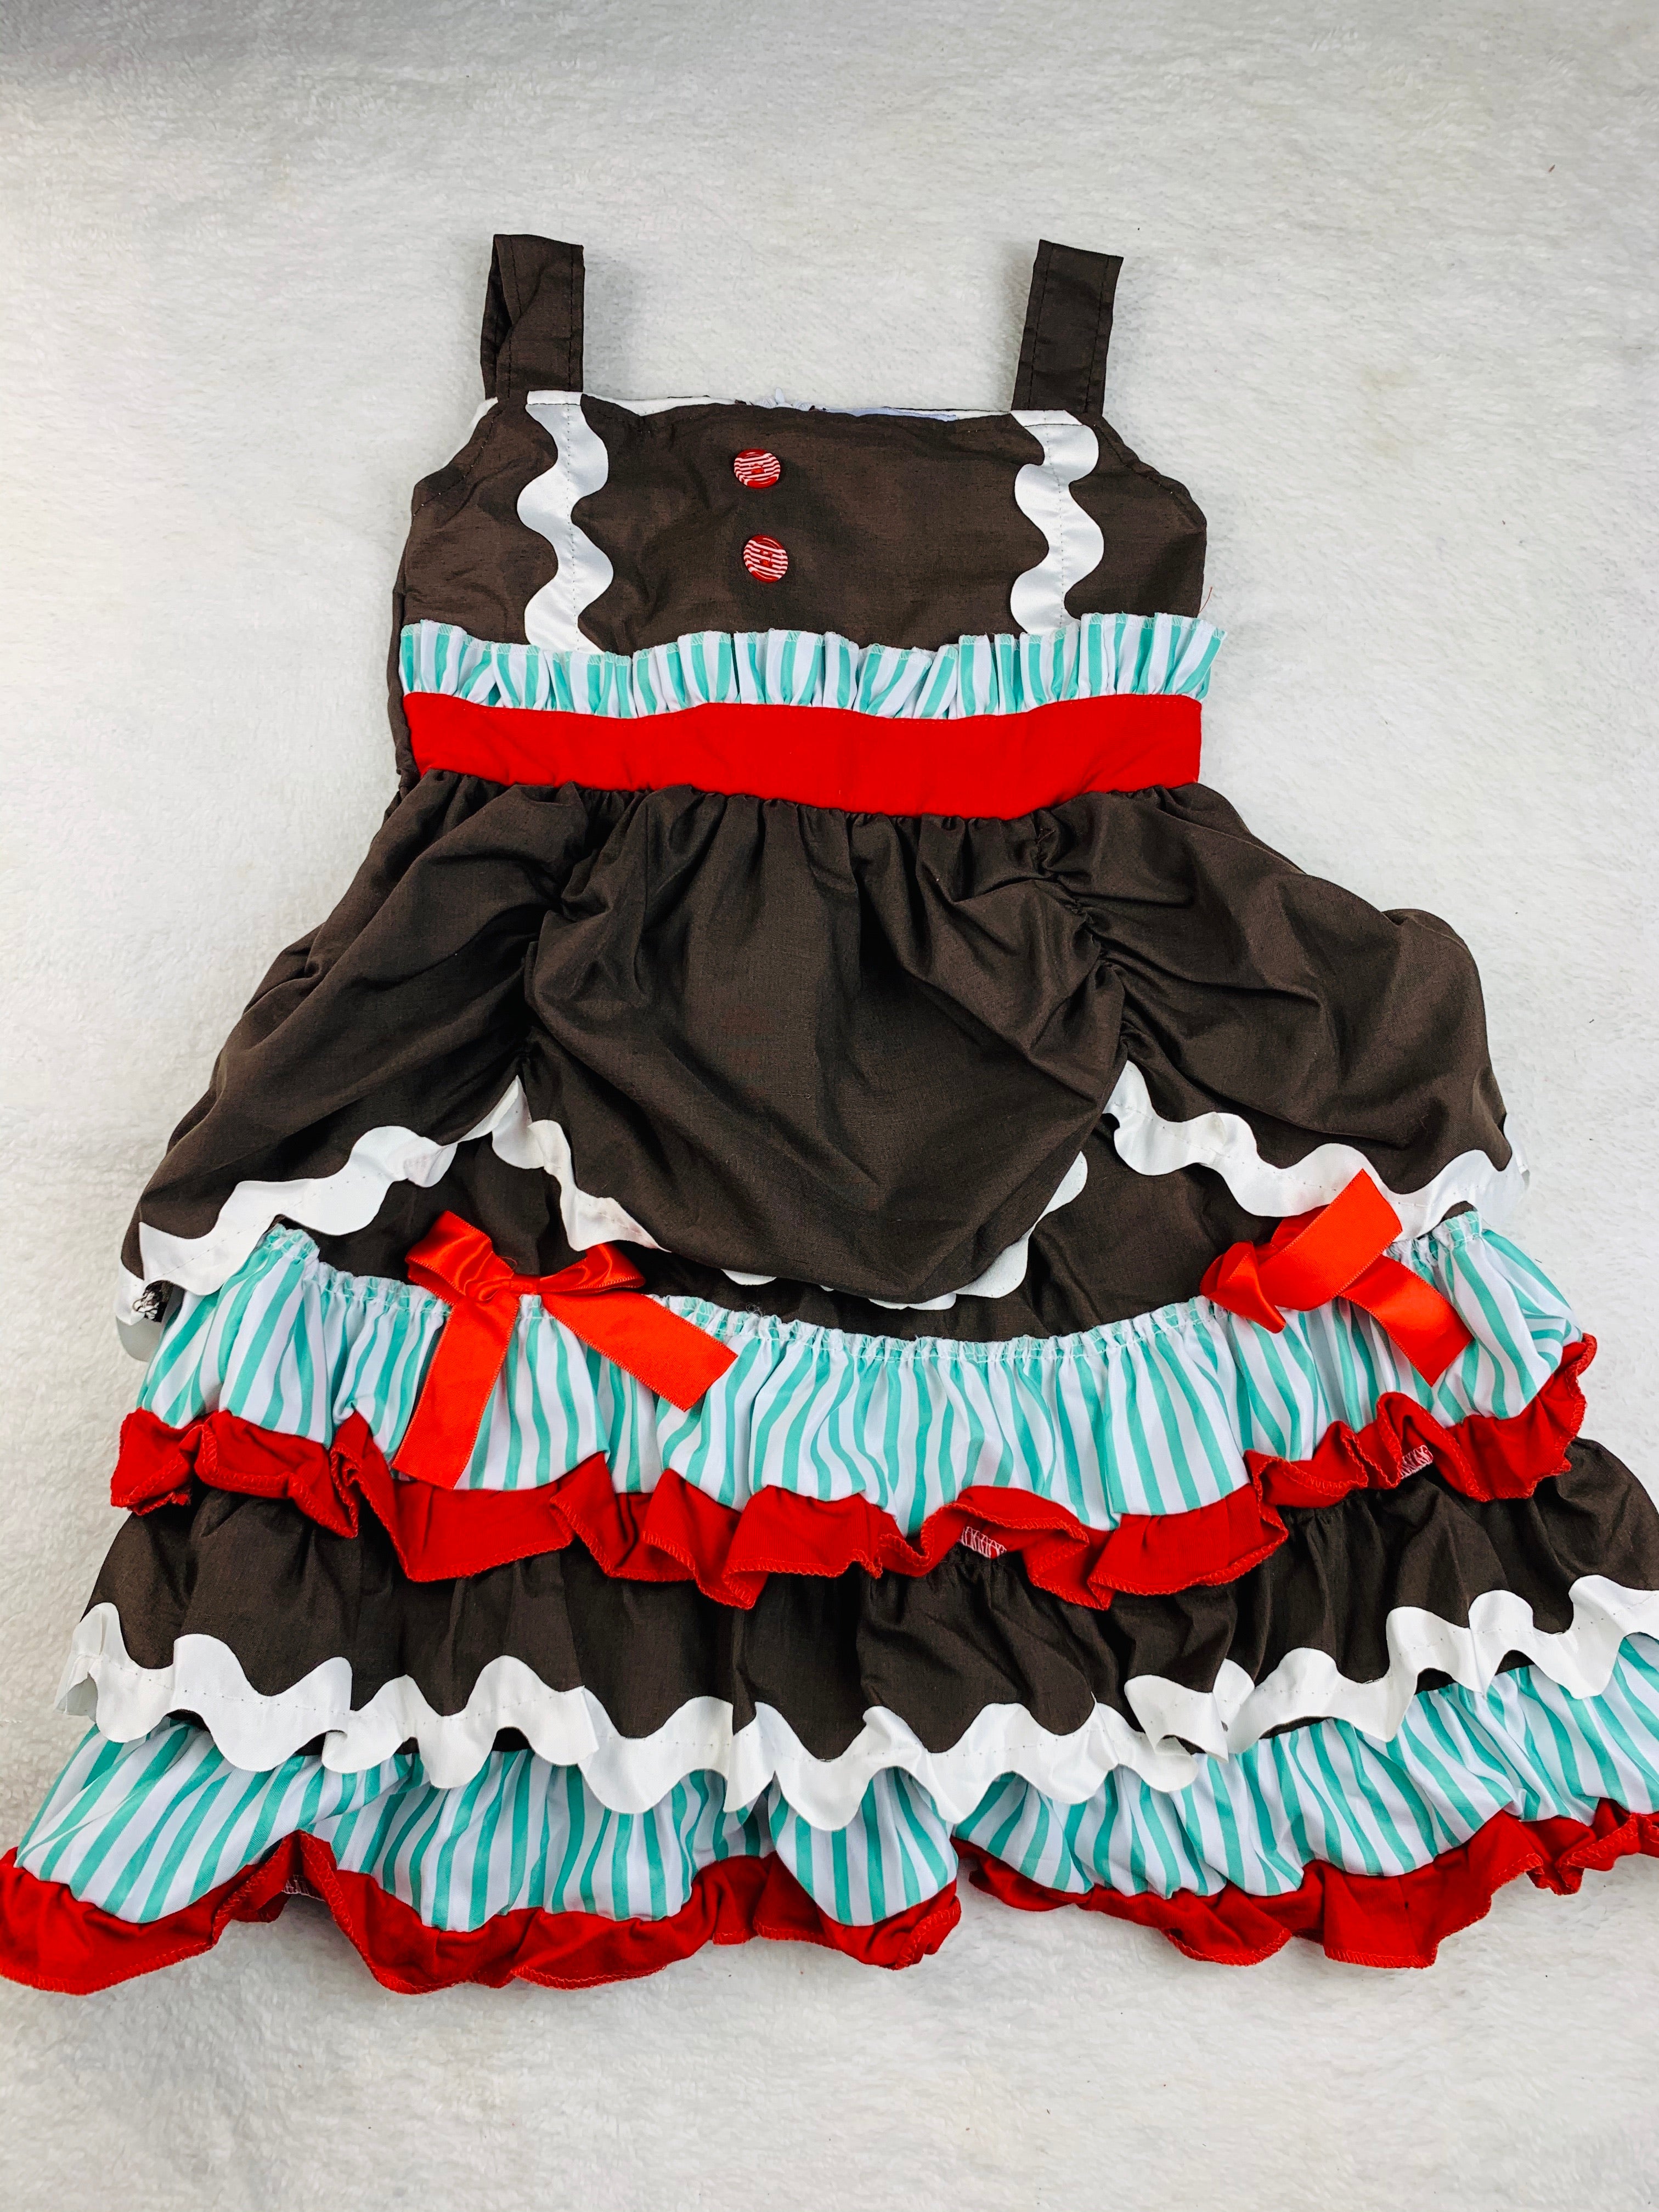 Gingerbread Ruffle Dress and Shirt IN STOCK!